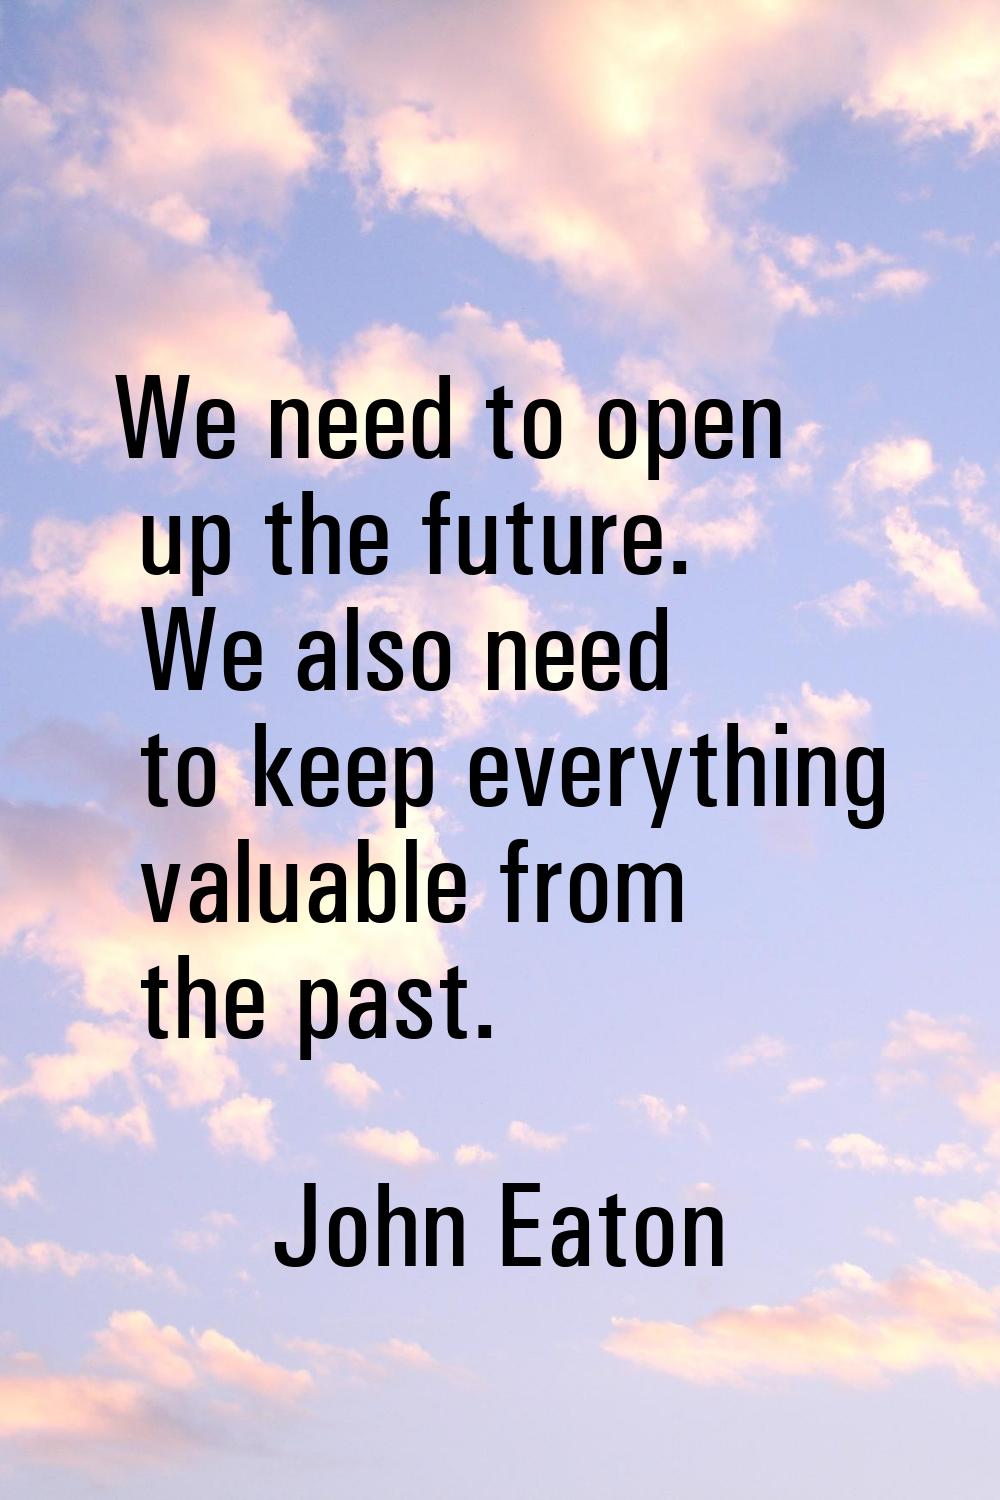 We need to open up the future. We also need to keep everything valuable from the past.